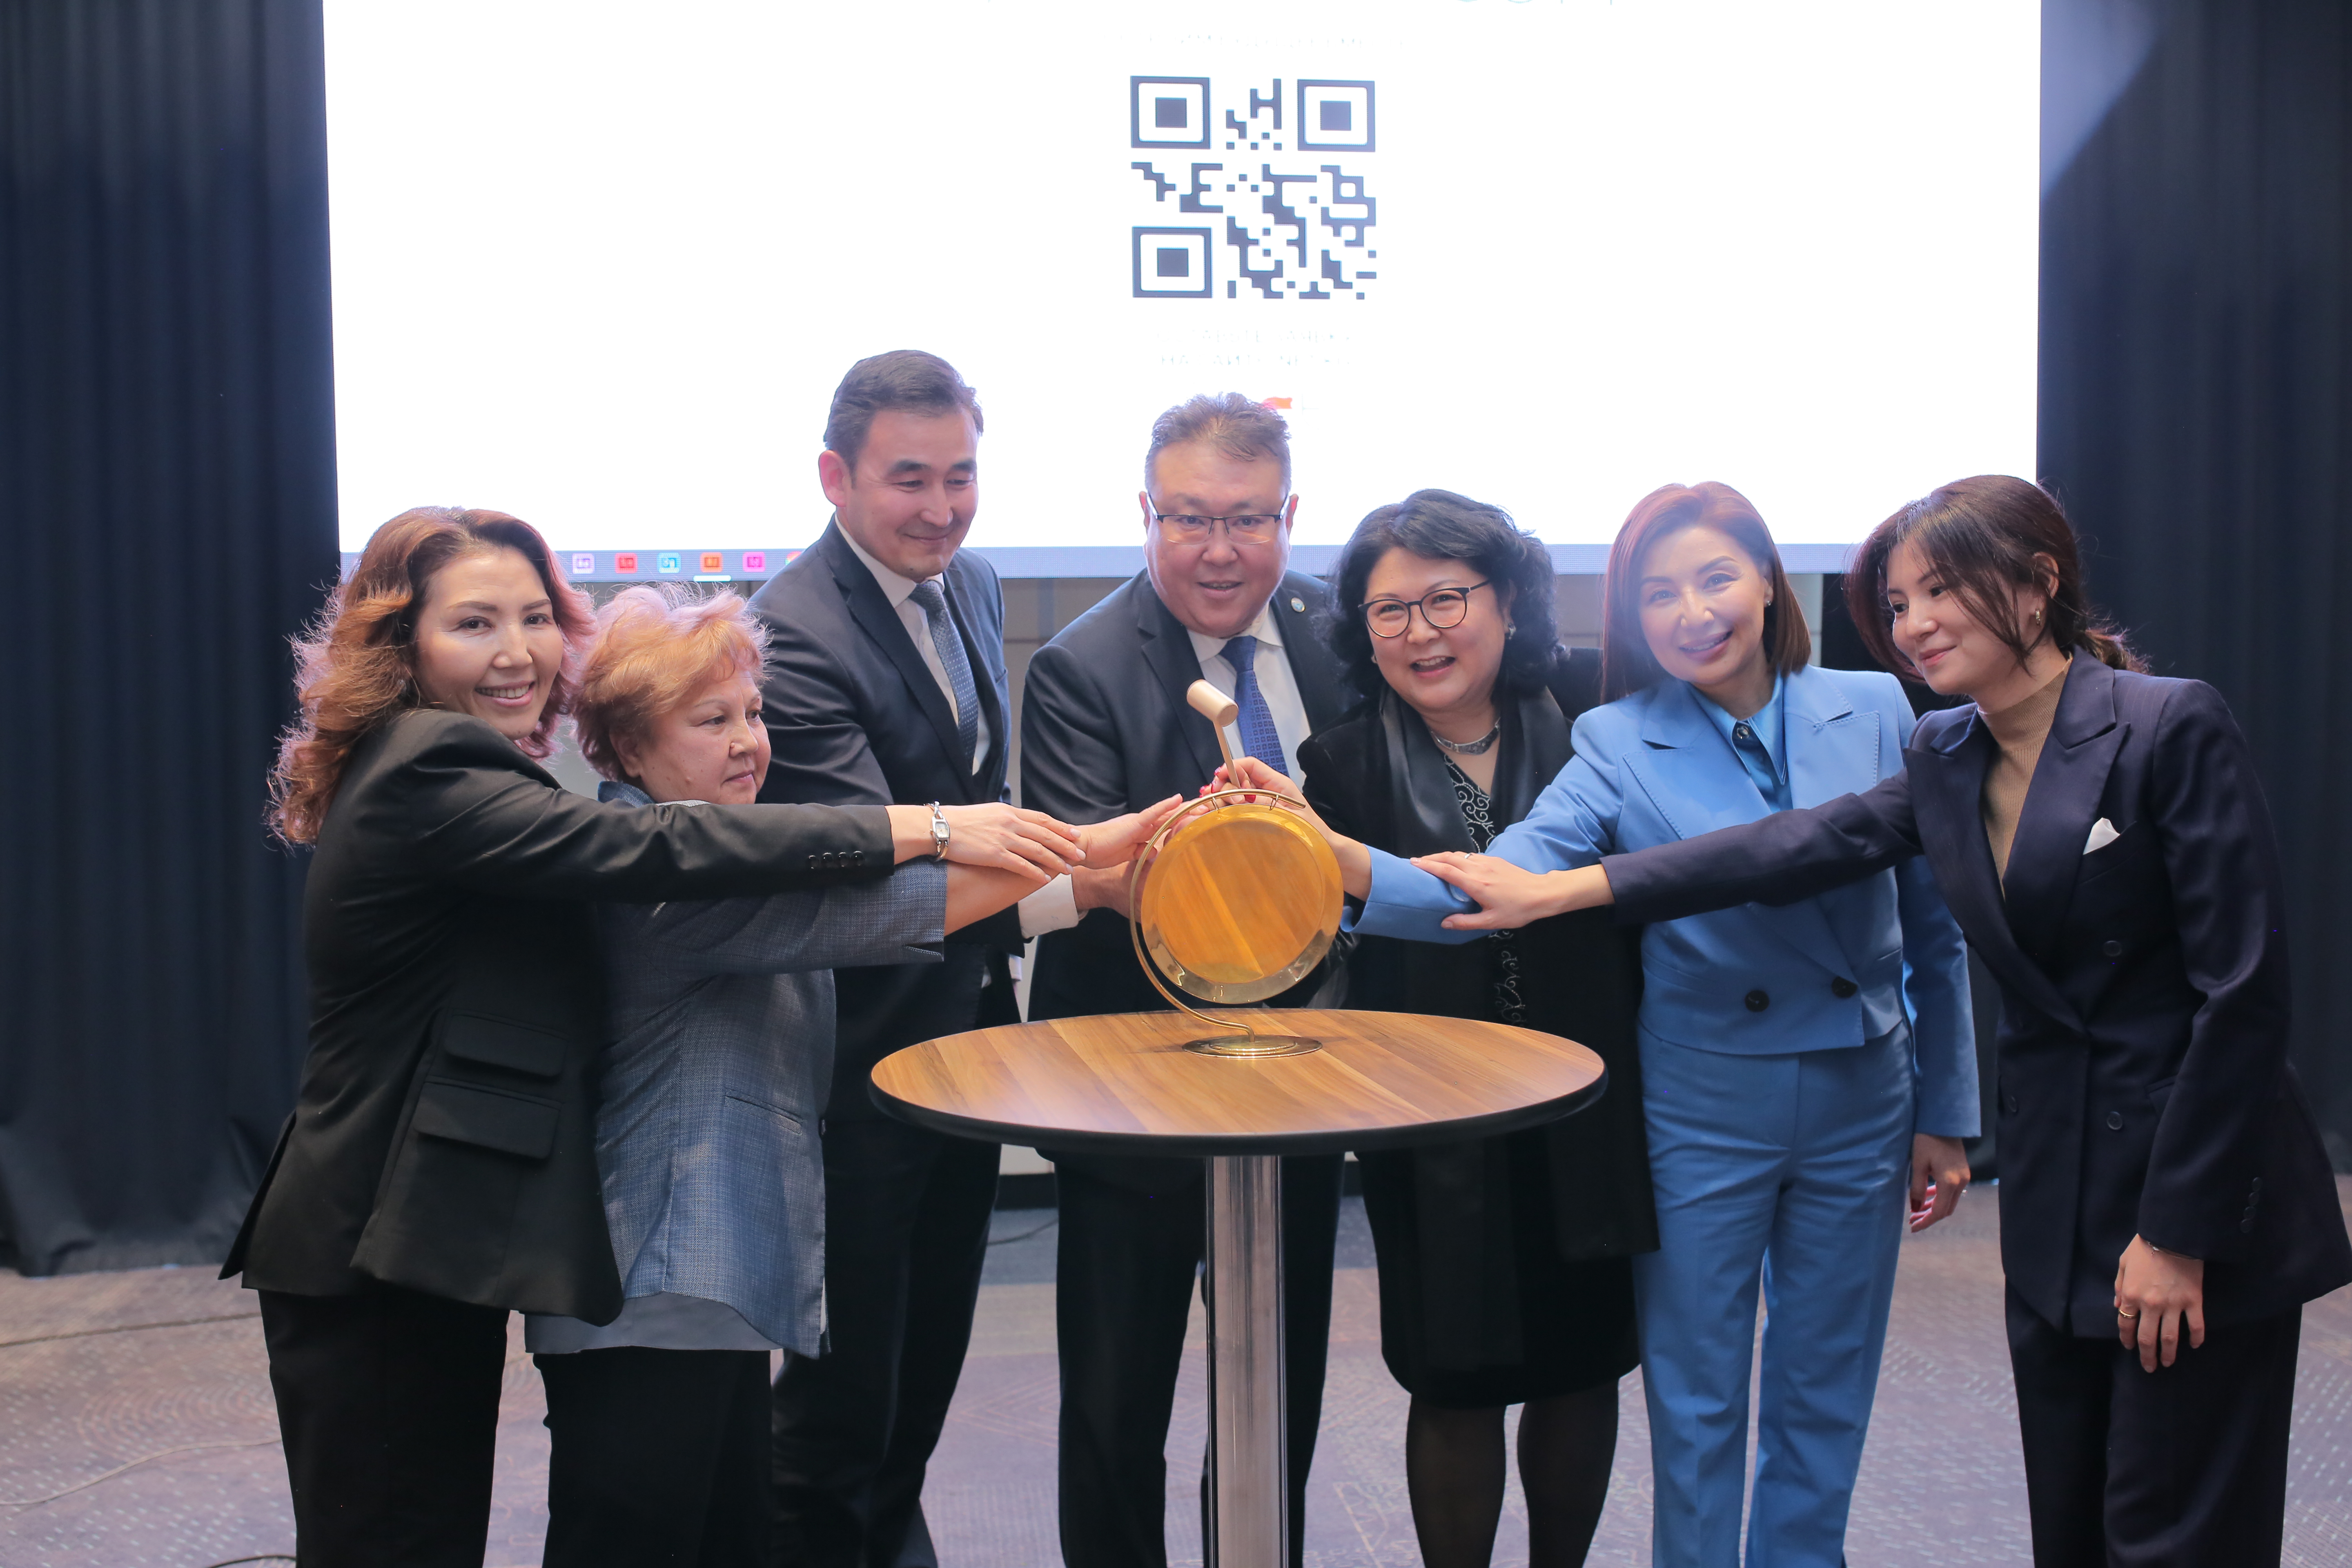 During the launch event, representatives from UN Women Kyrgyzstan, Bank of Asia, Institute for Economic Policy Research of the Kyrgyz Republic, Astana International Financial Centre’s Green Finance Centre, Kyrgyz Stock Exchange, and financial company ‘Senti’ rang the bell to officially commence the first-ever gender bonds trading in Kyrgyzstan. Courtesy of Bank of Asya. 